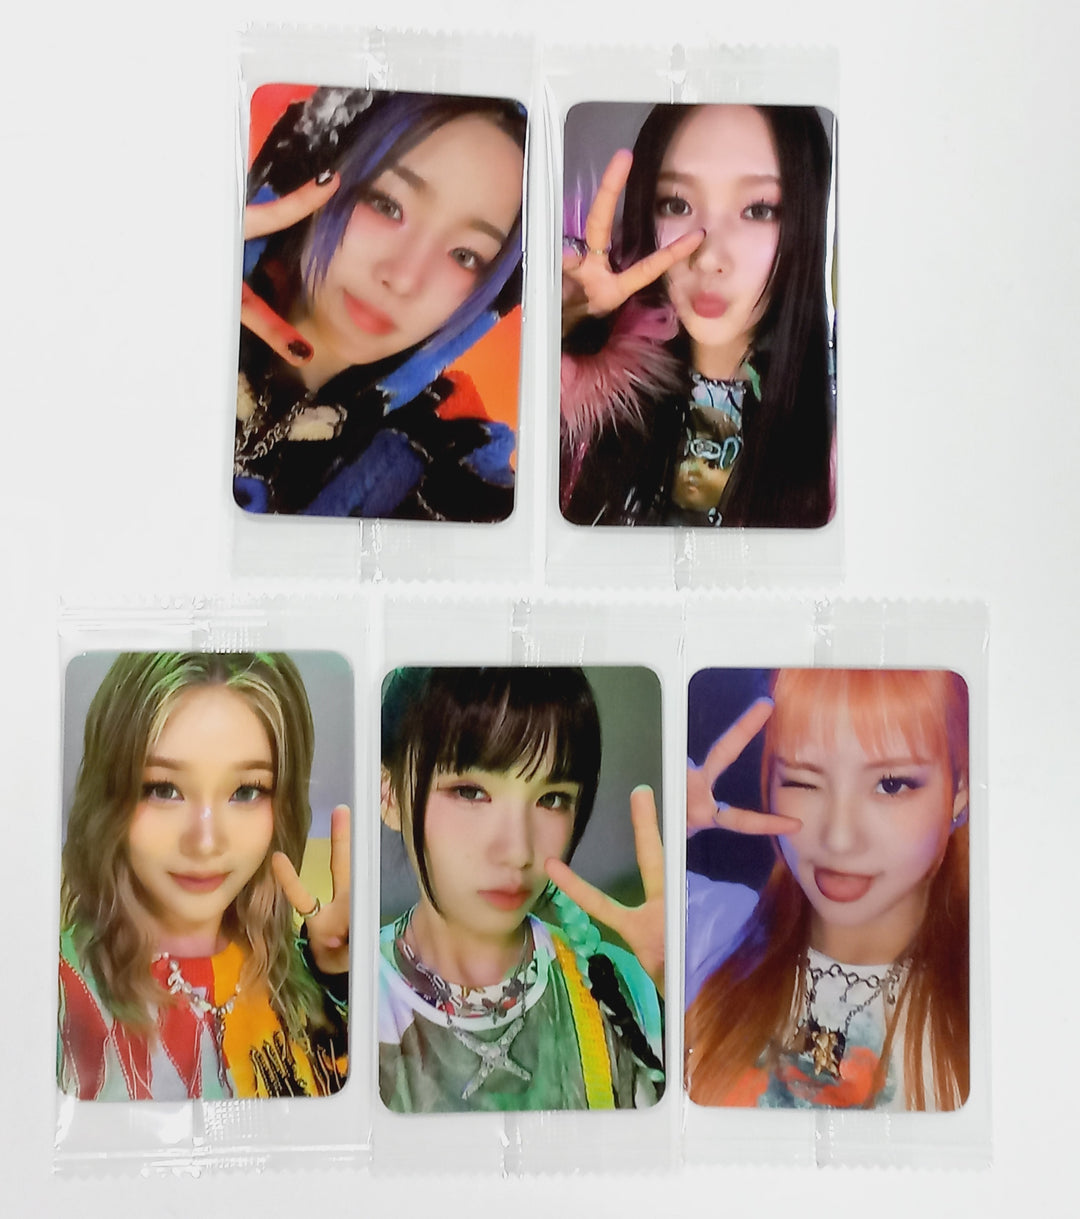 YOUNG POSSE "XXL" - Ktown4U Fansign Event Photocard [24.4.2]